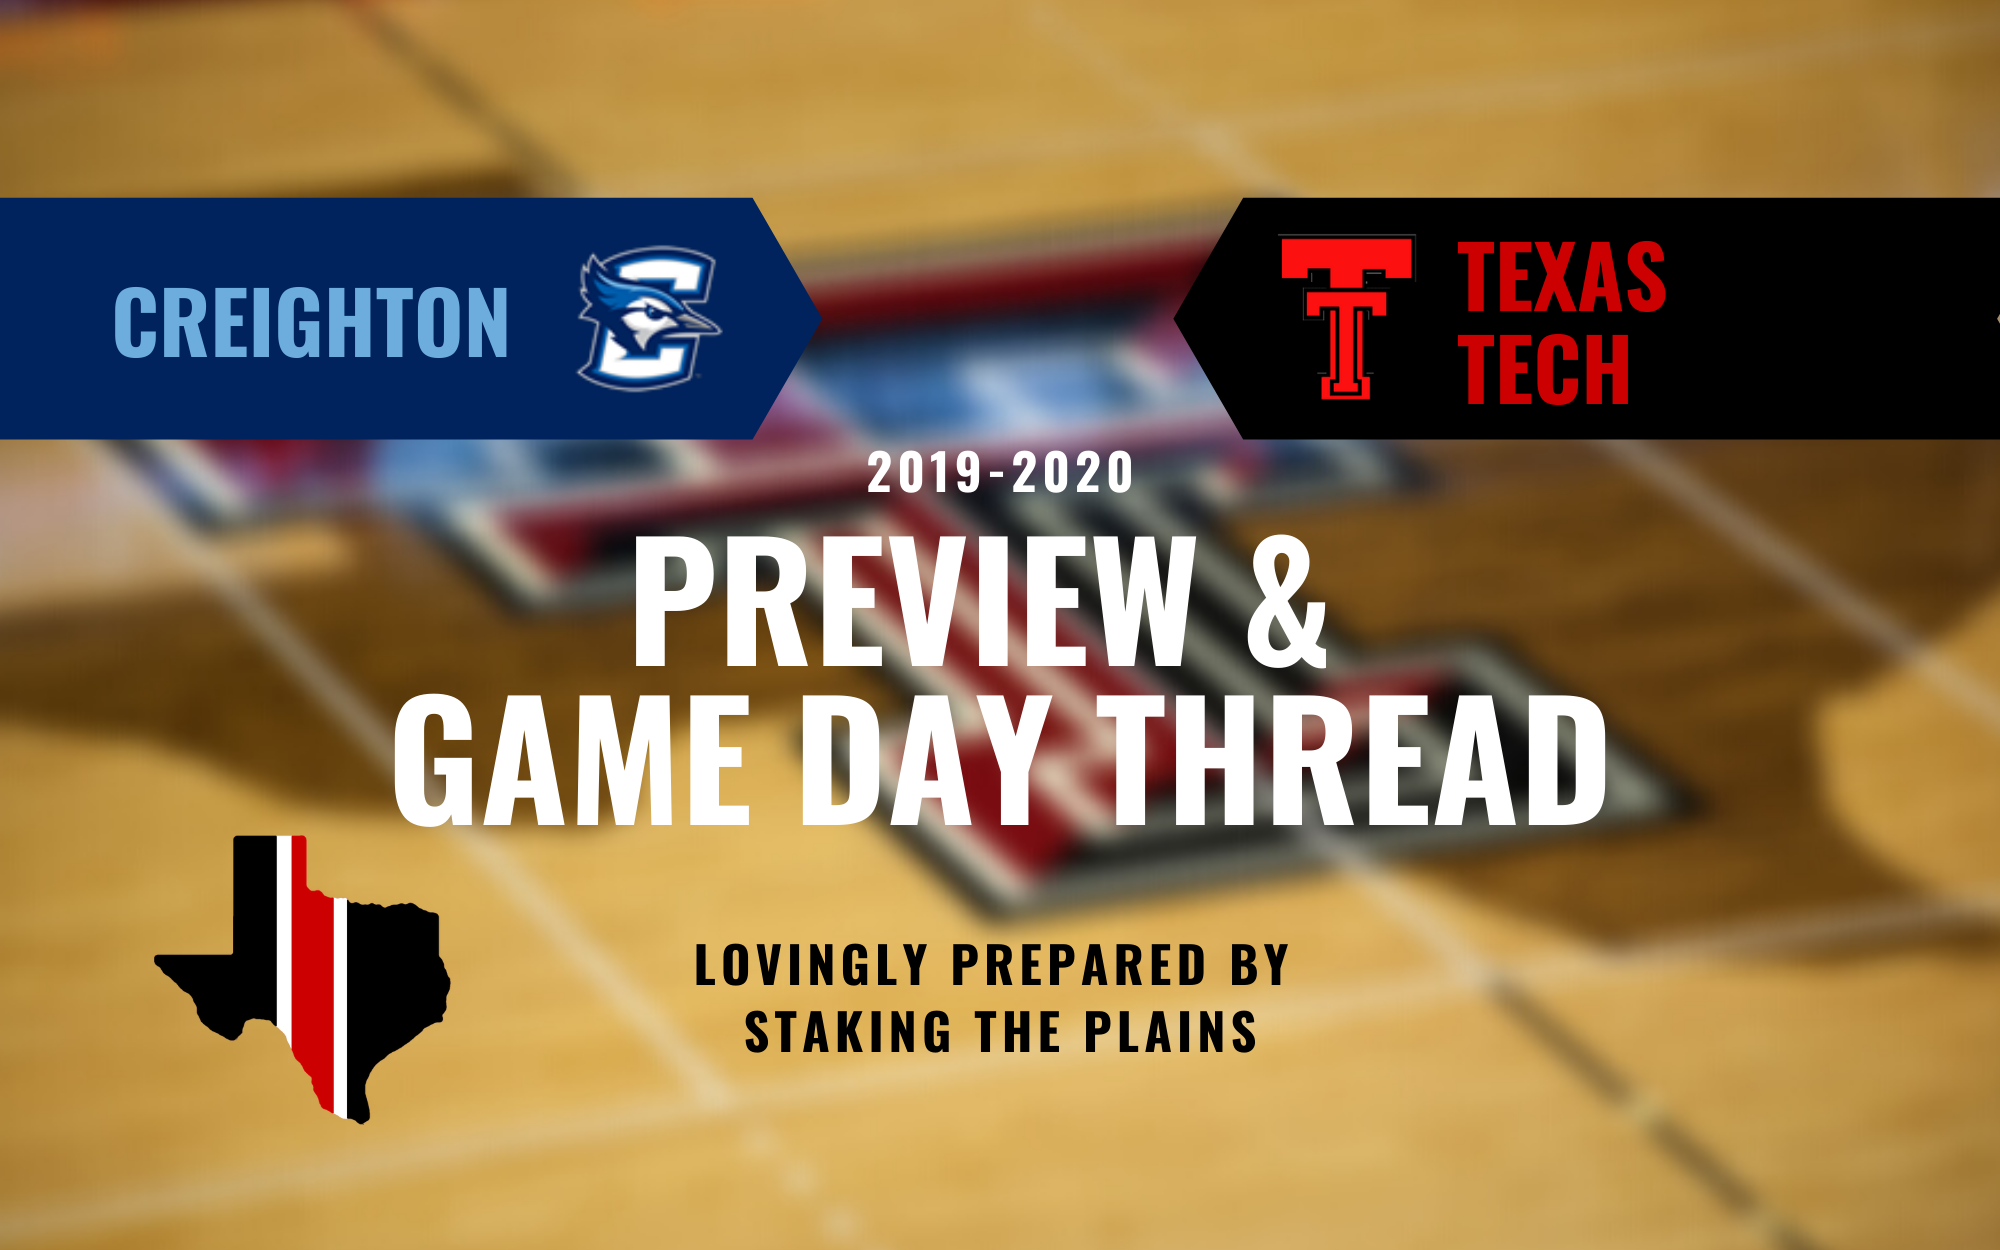 Preview and Game Day Thread: Creighton Blue Jays vs. Texas Tech Red Raiders